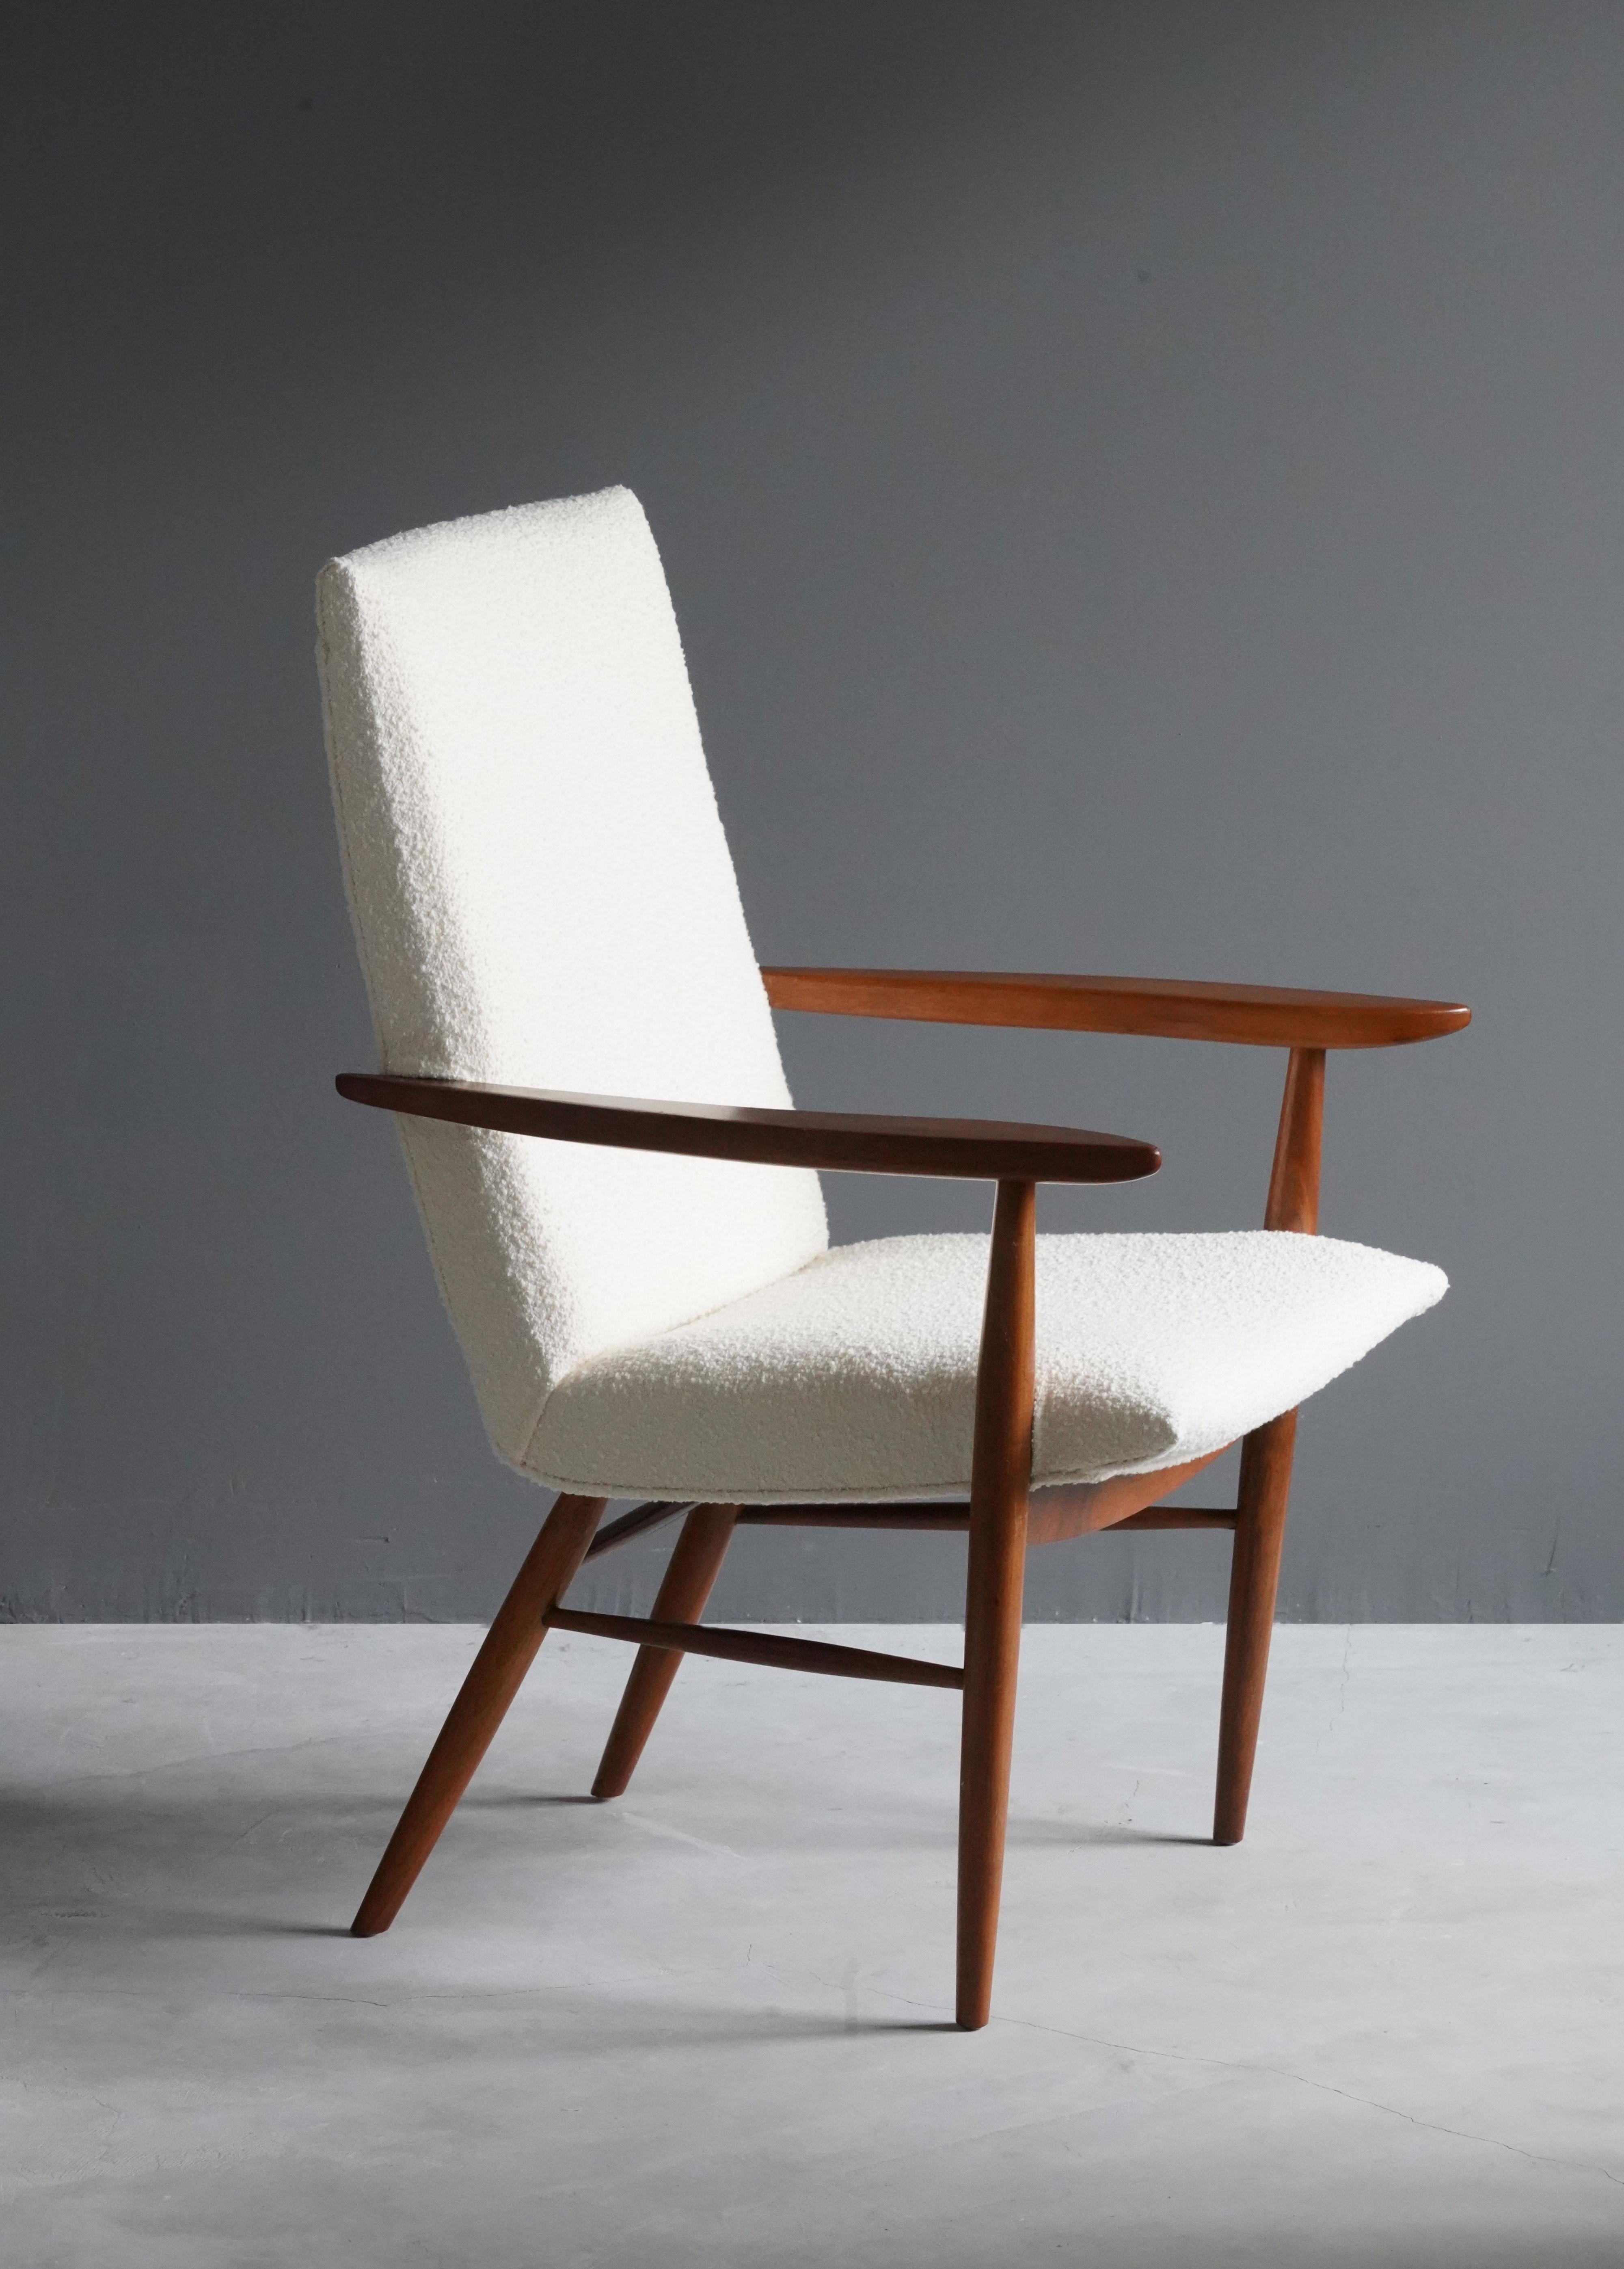 An arm chair / side chair, designed by George Nakashima, produced by Widdicomb Furniture Company, Grand Rapids, Michigan, America, 1960s.

Features finely turned walnut, overstuffed seat reupholstered in Knoll Bouclé fabric.